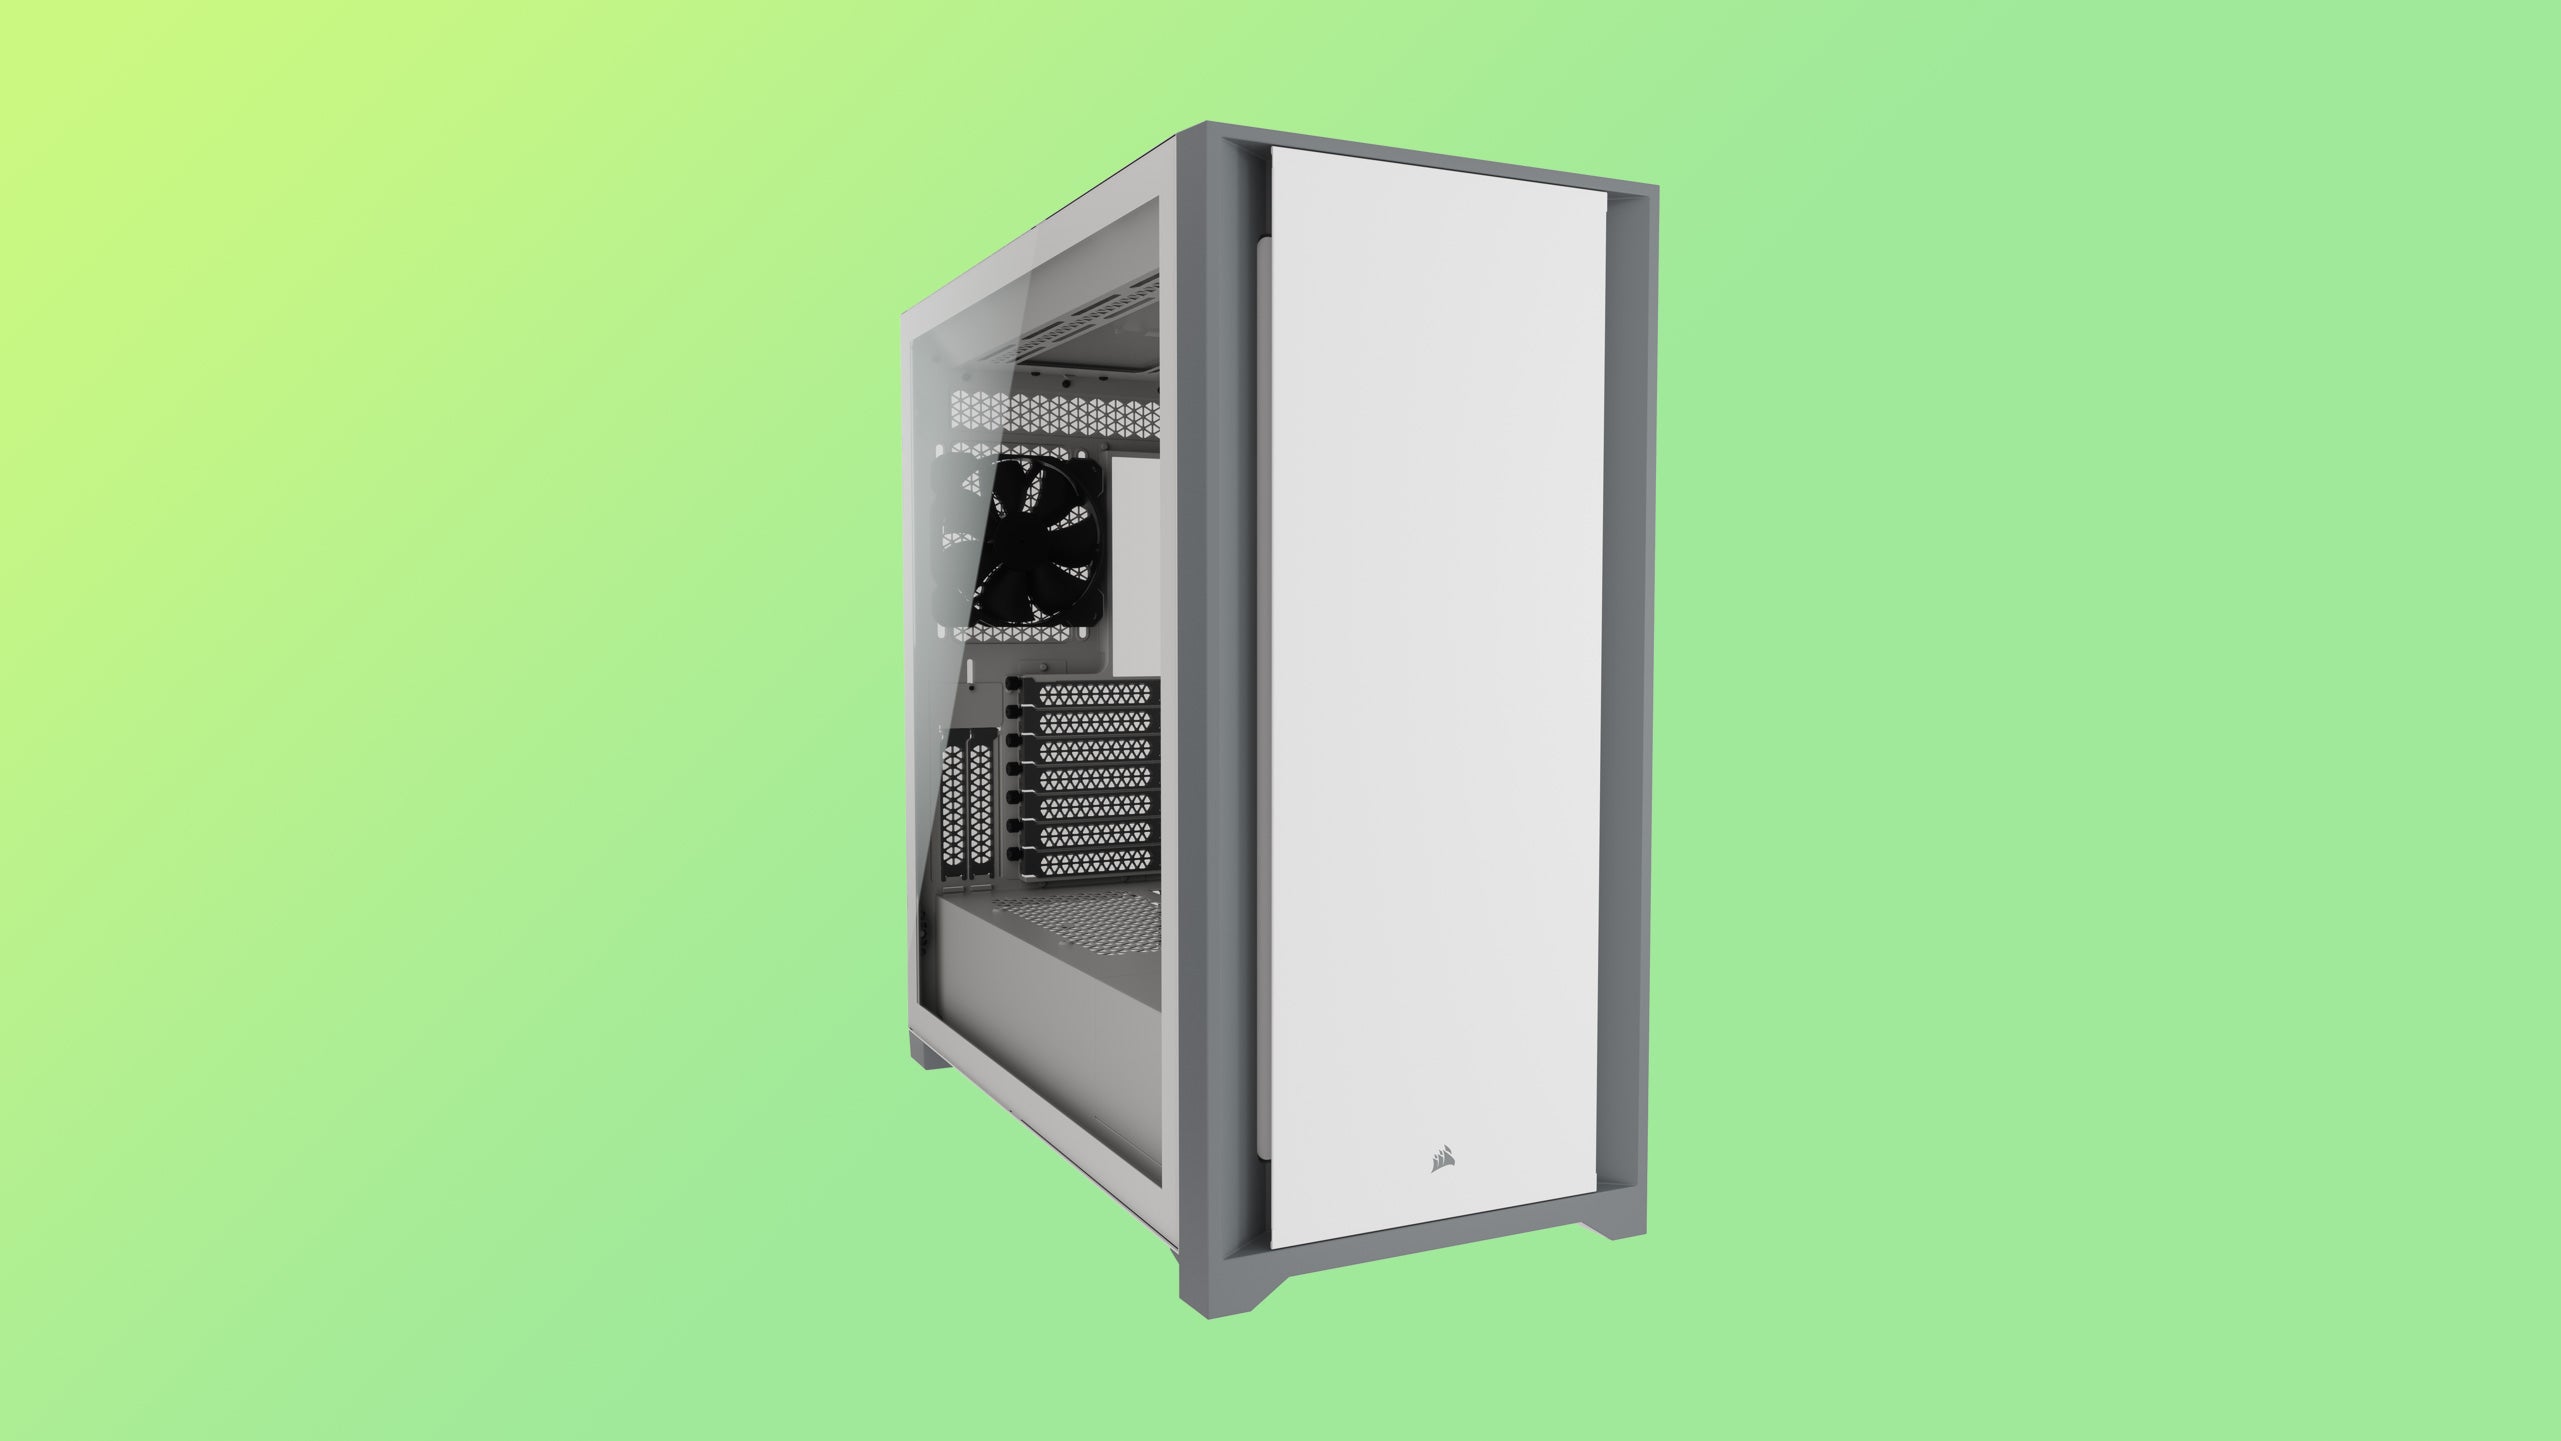 corsair 5000d pc case, shown in white with a clean and modern white/grey design